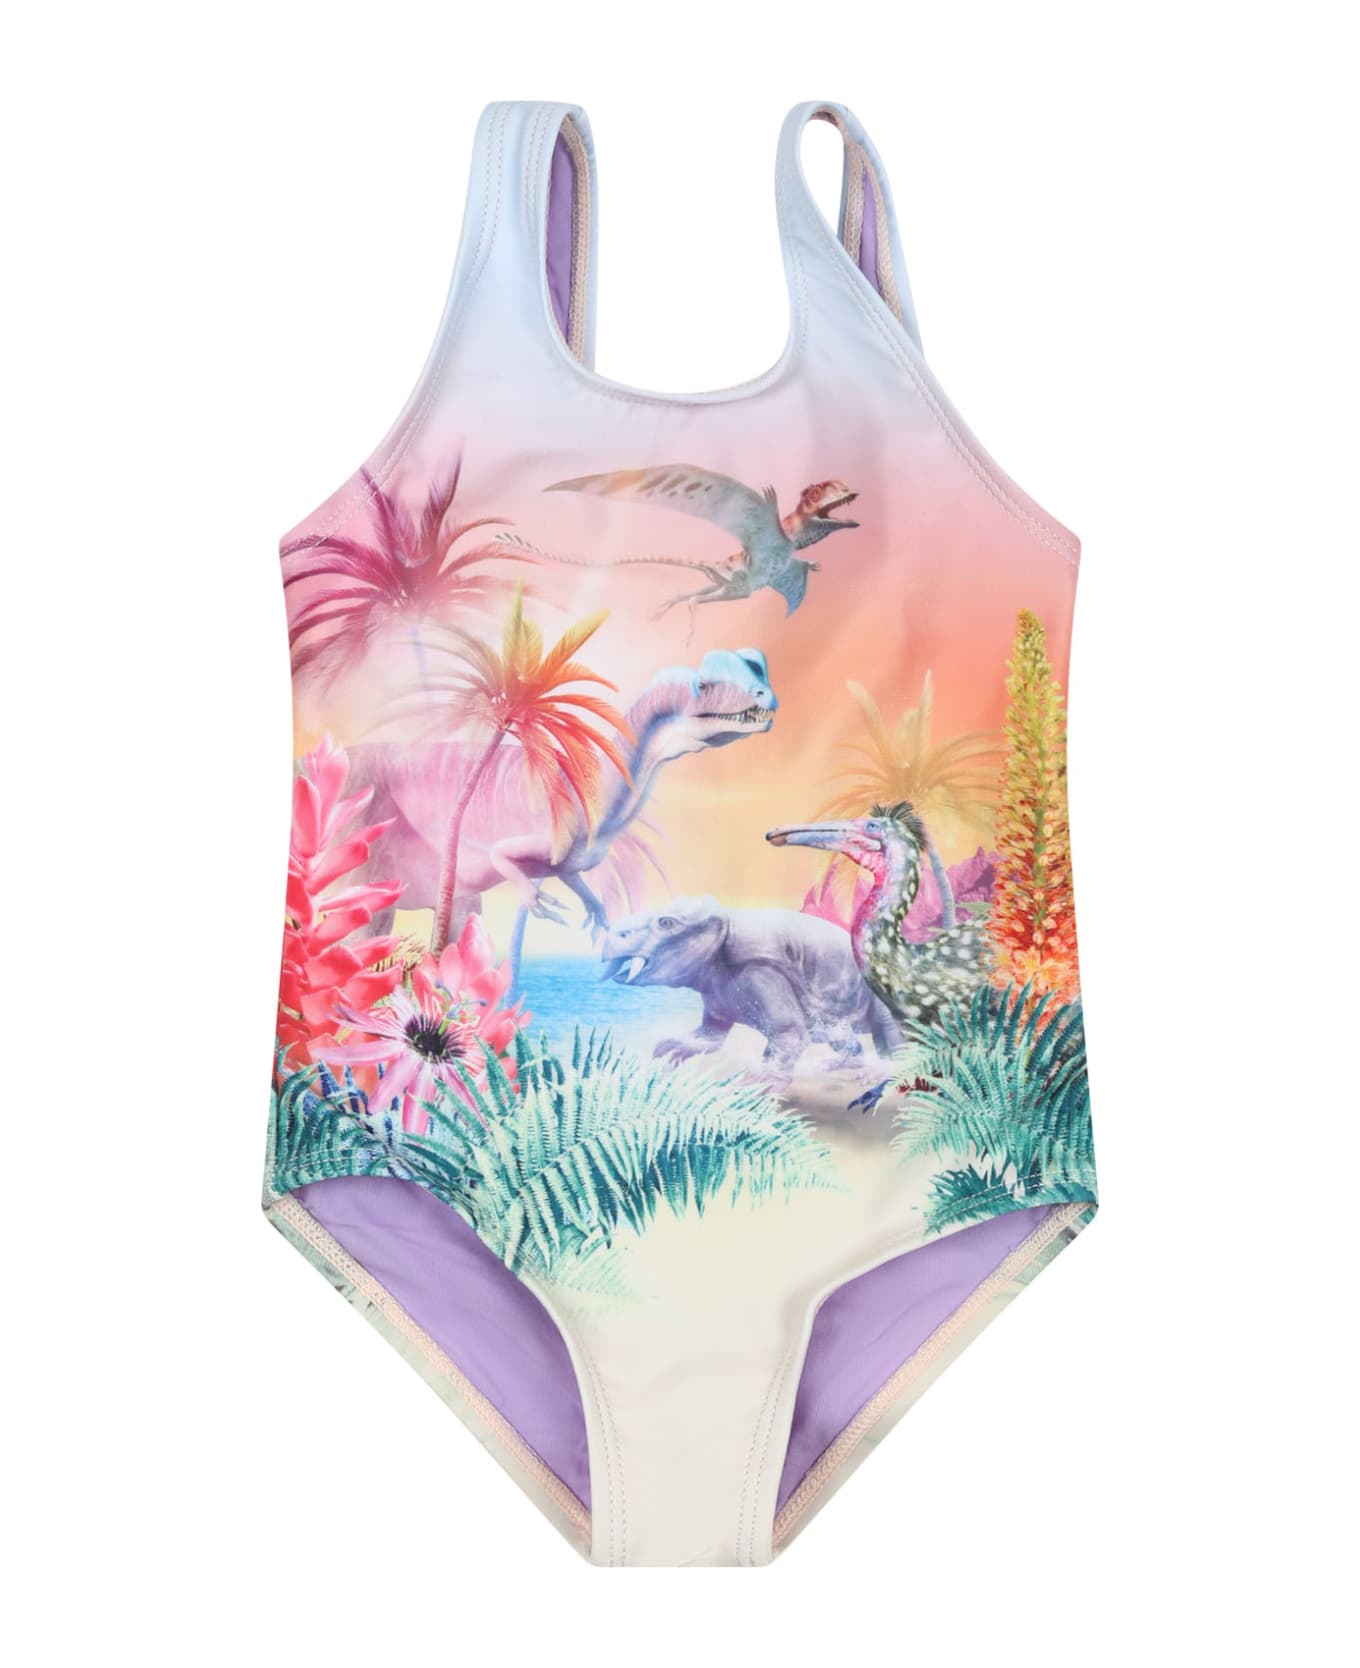 Molo Purple One-piece Swimsuit For Bebe Girl With Dinosaur Print - Multicolor